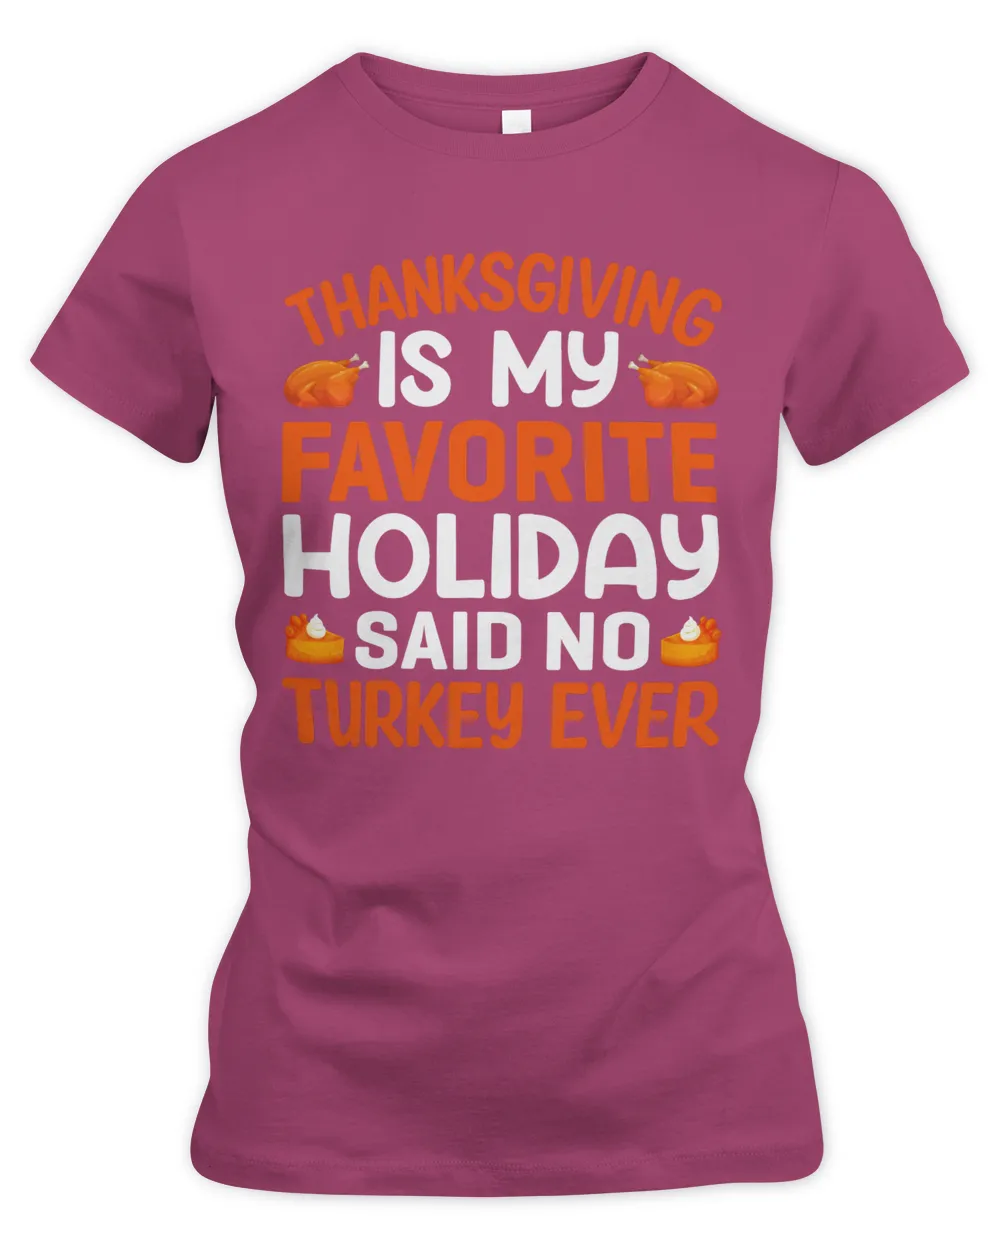 Thanksgiving is my favorite holiday say no turkey ever